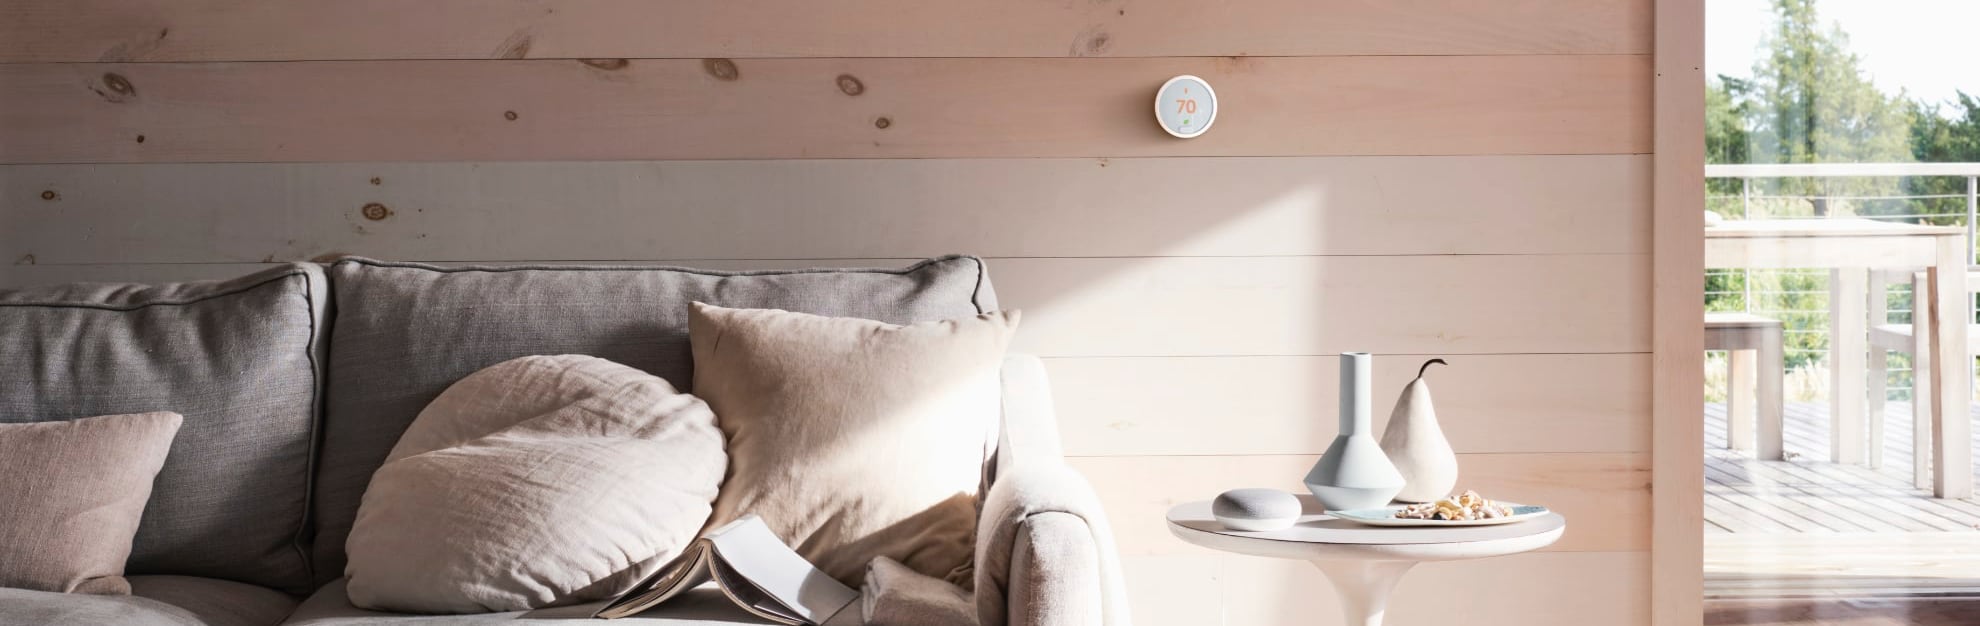 Vivint Home Automation in Milwaukee